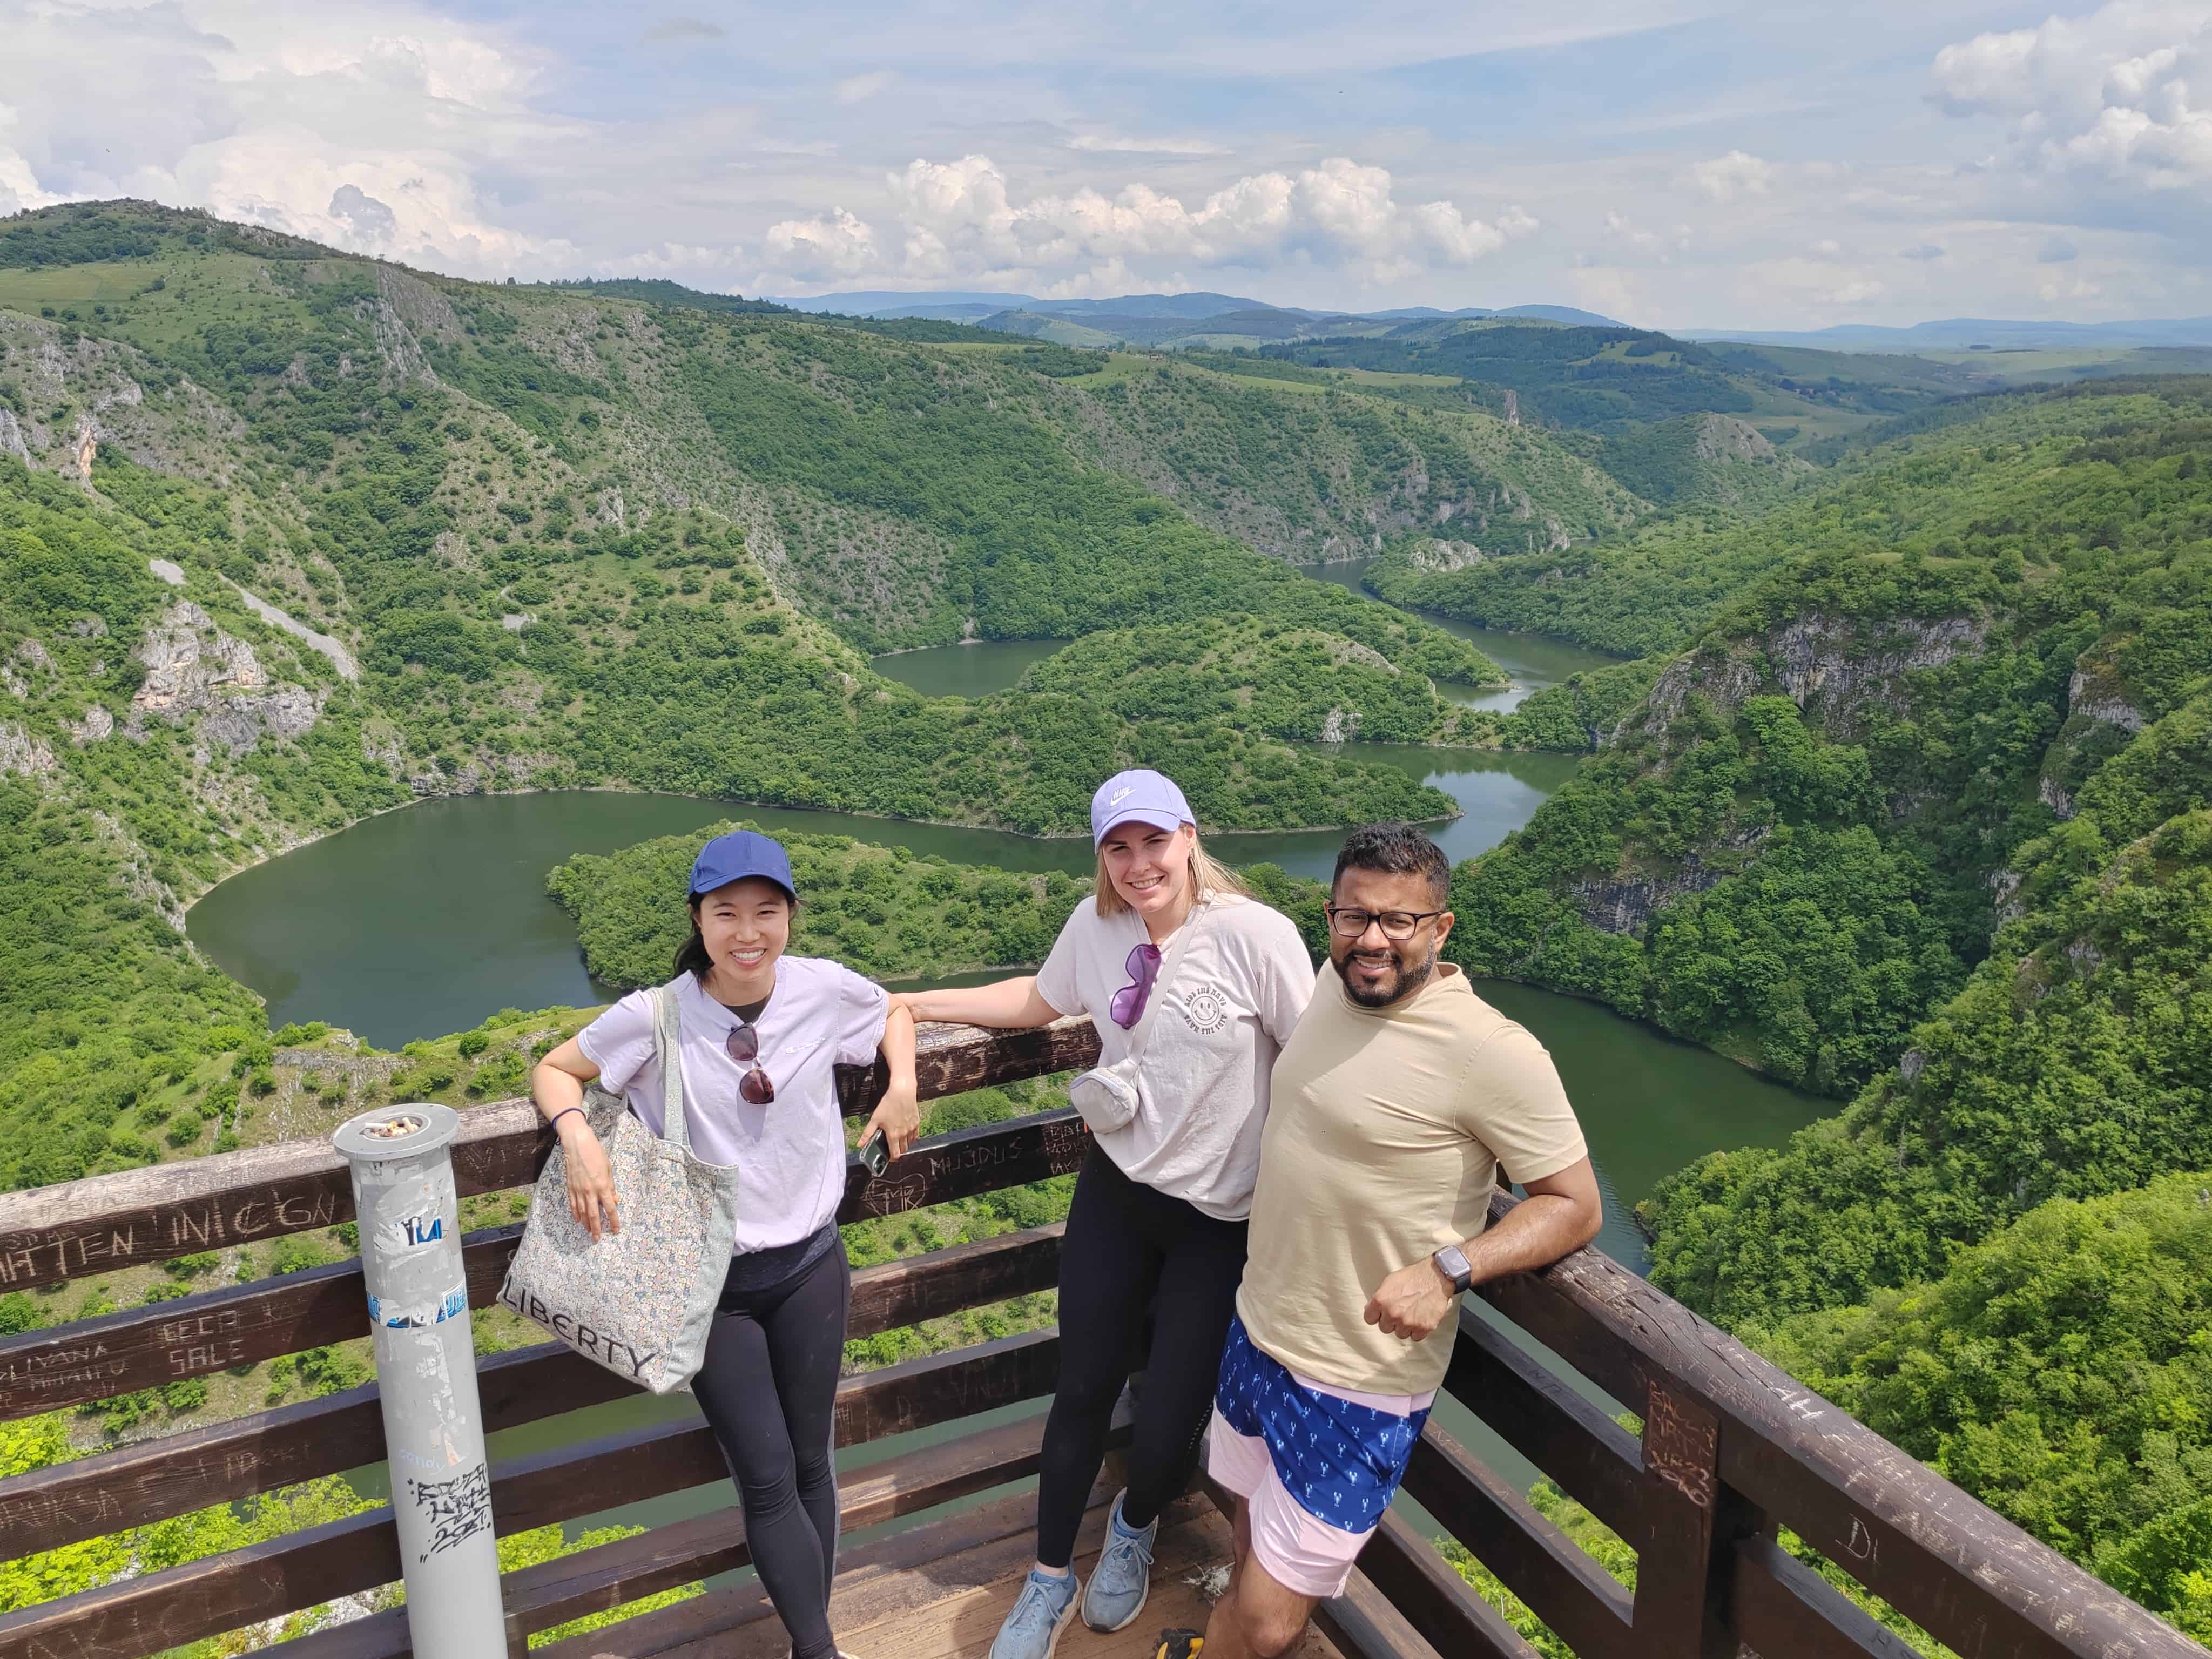 Panoramic view of Uvac canyon and river wth three people posing on a picture